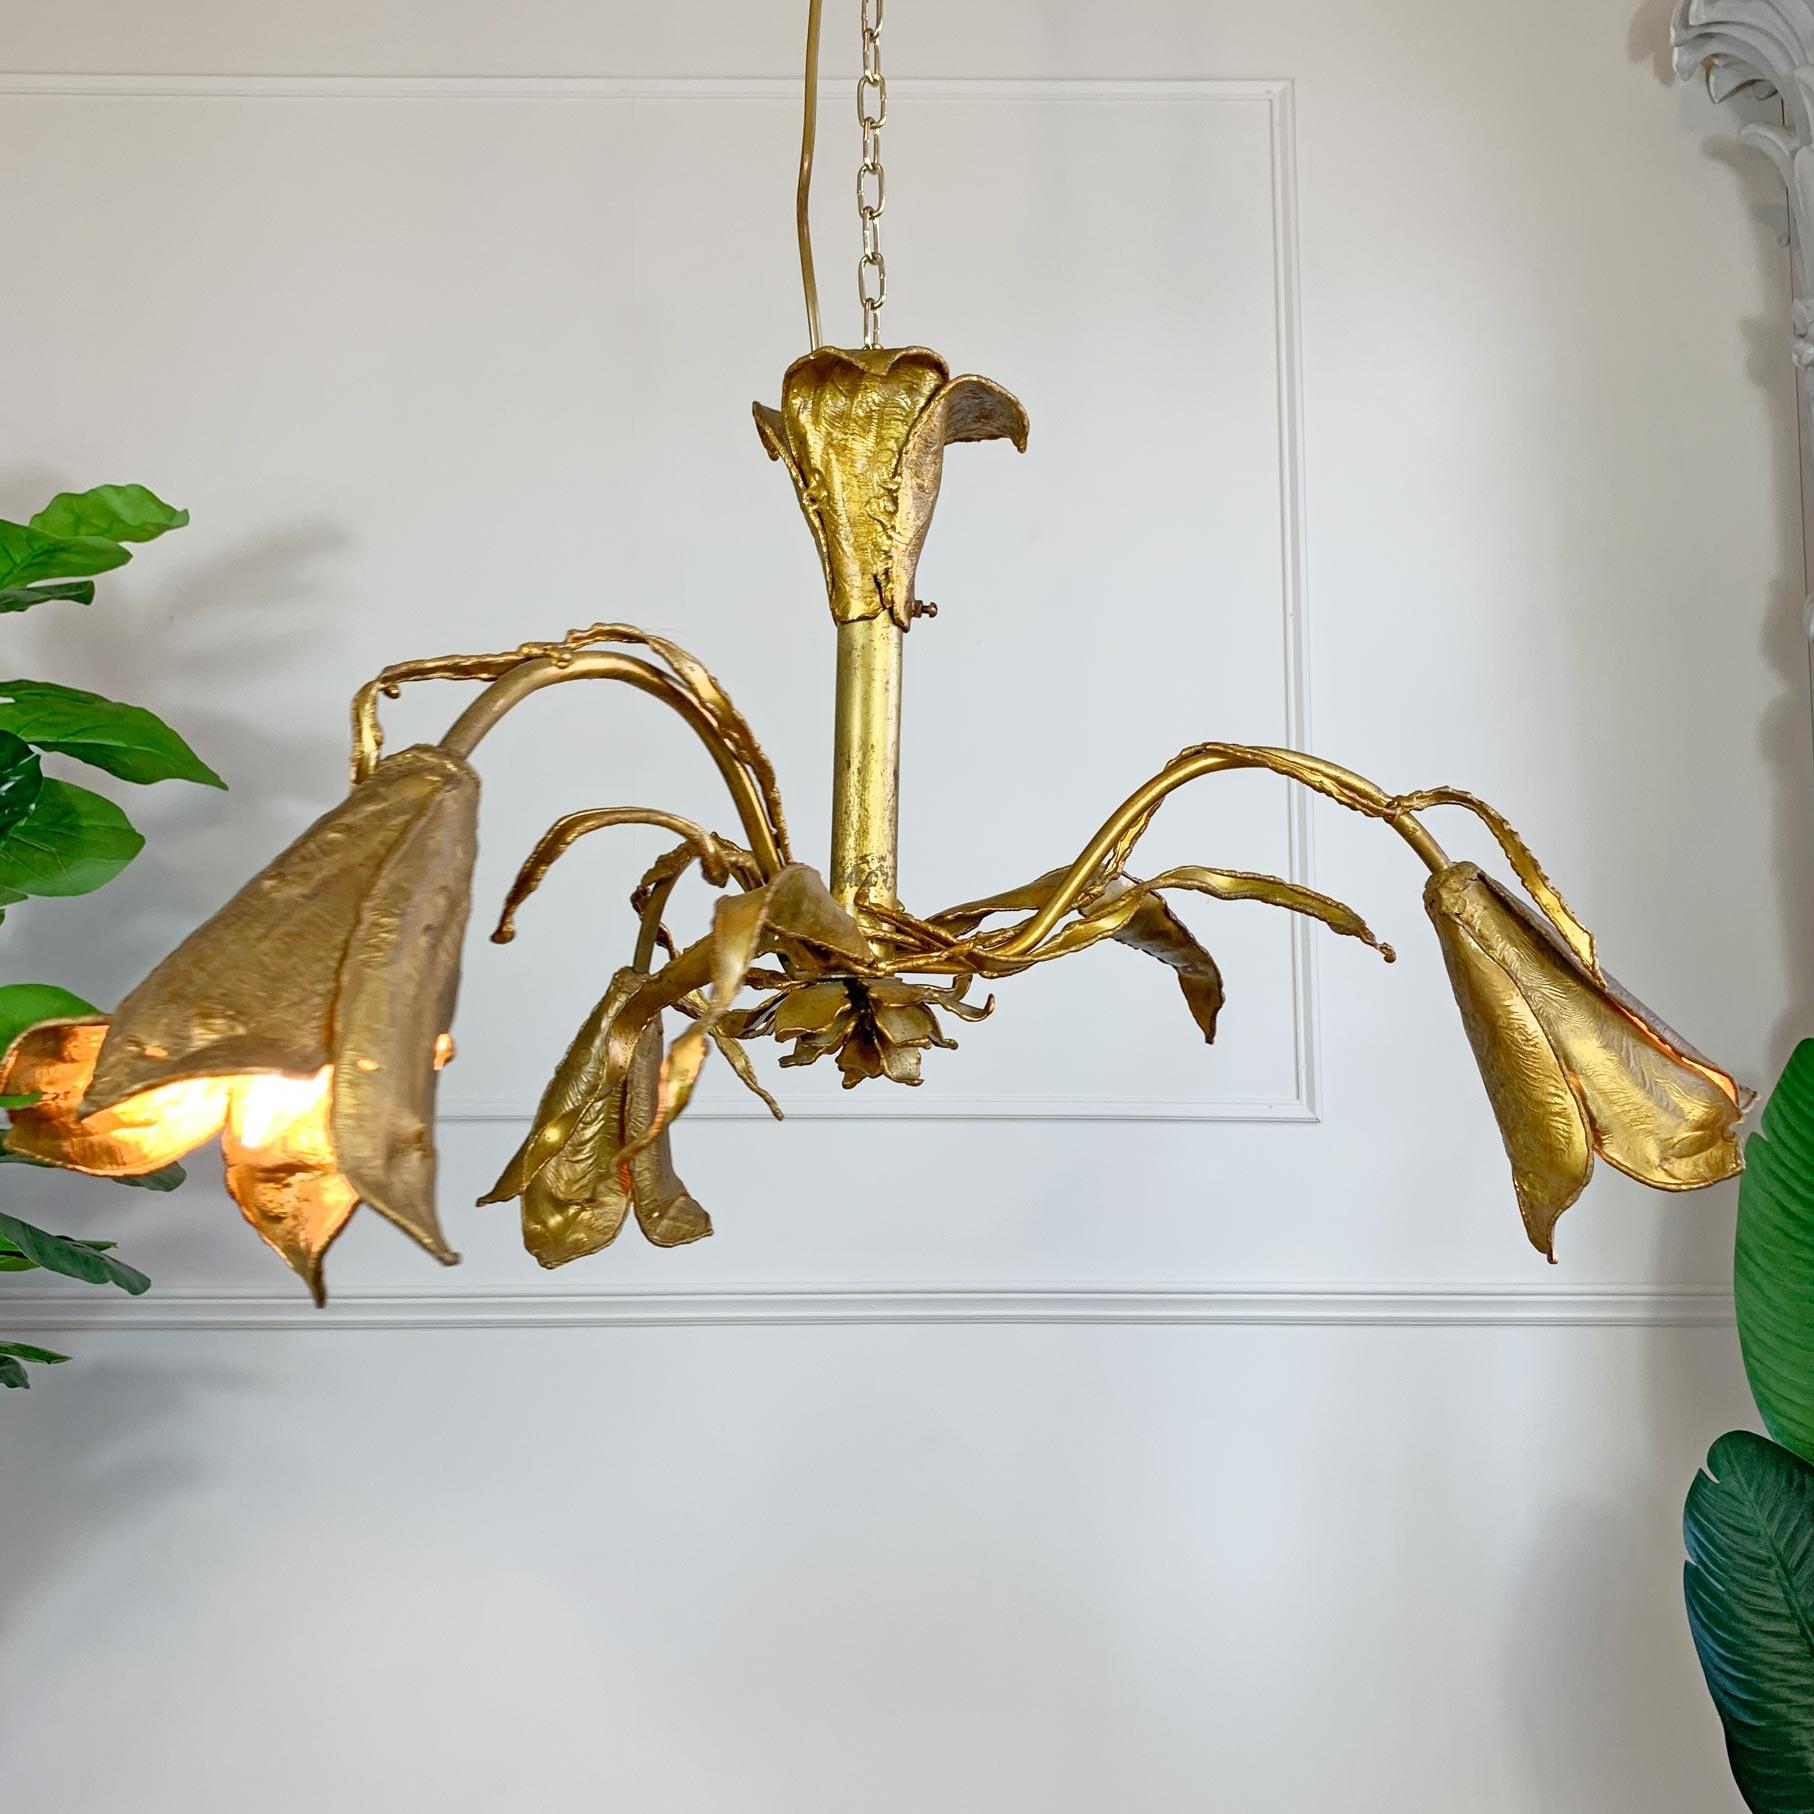 An extremely rare and large ceiling light, three beautifully proportioned lily flowers represent the bulb holders, the light resplendent in Moerenhout’s signature Brutalist style, the large central stem with twisting leaf design and a central flower